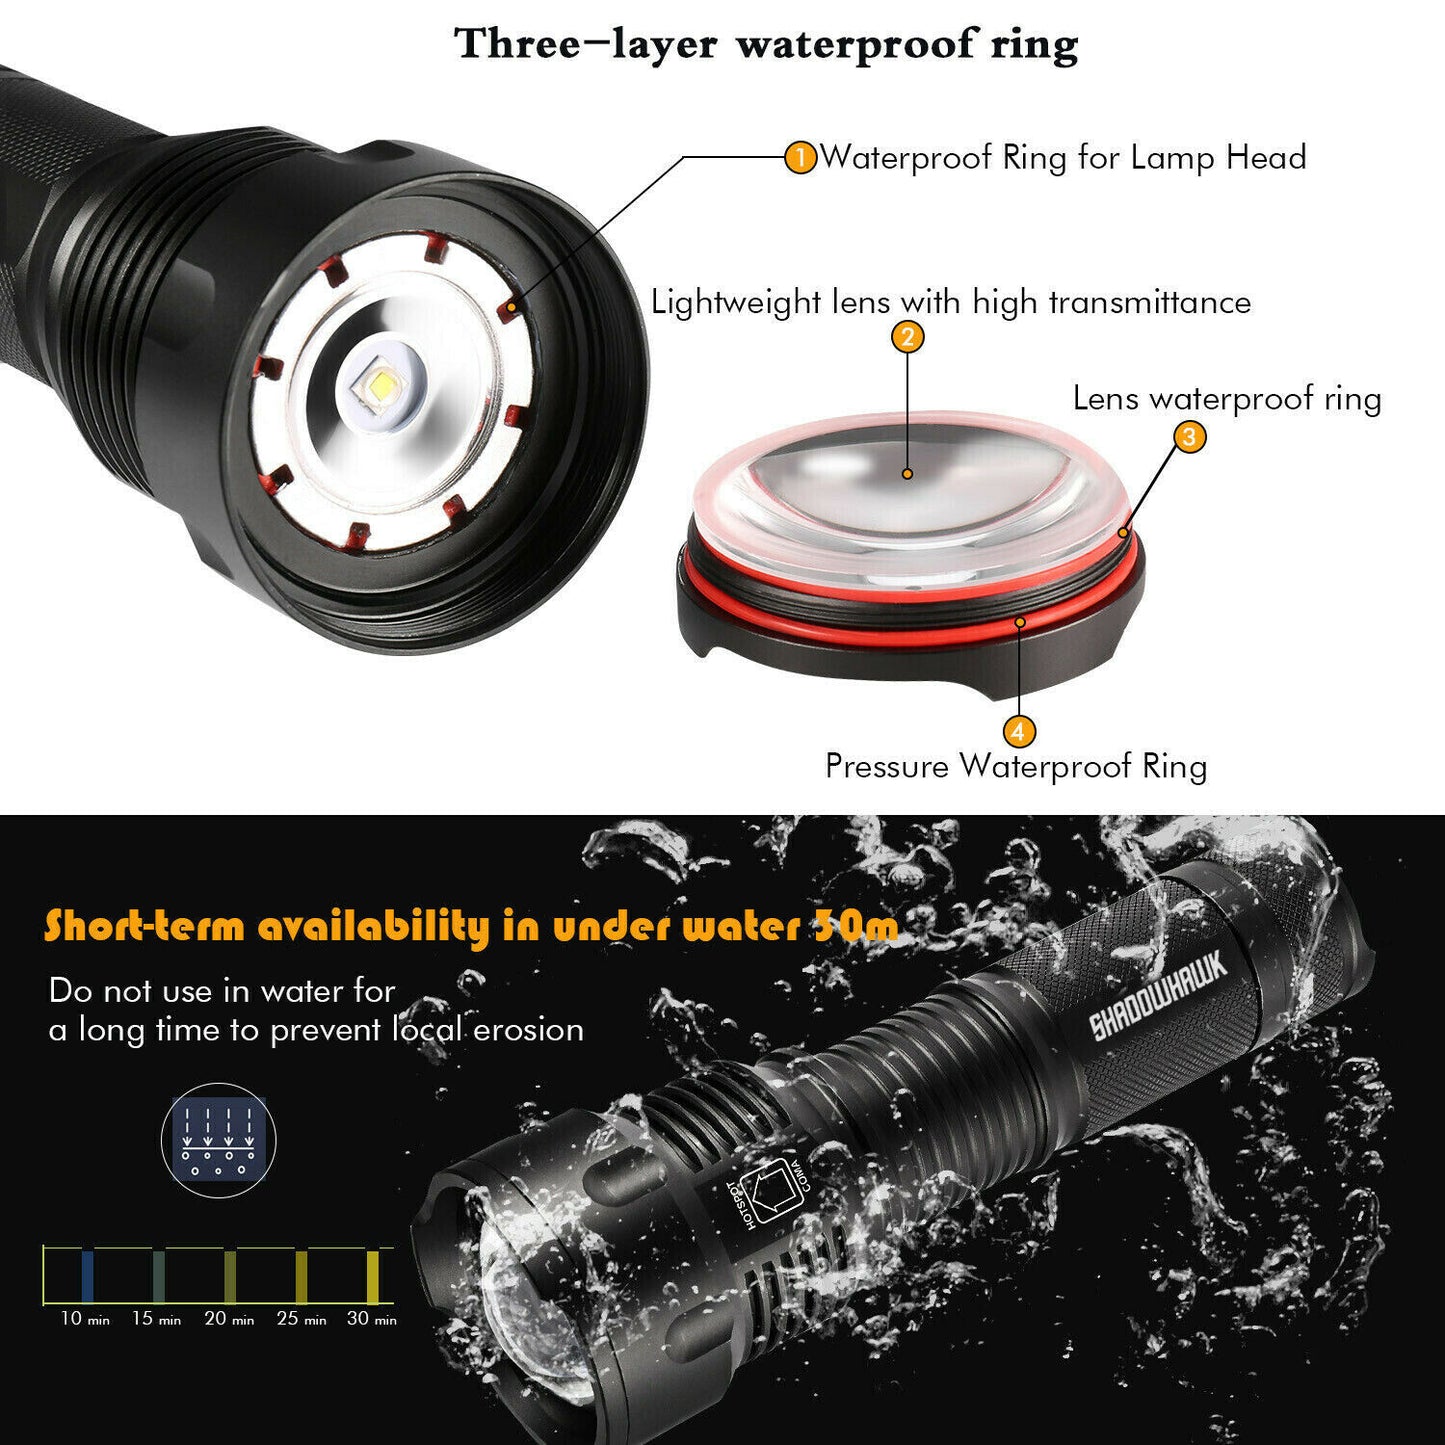 Tactical Flashlight Super bright 80000lm USB Rechargeable Flashlight